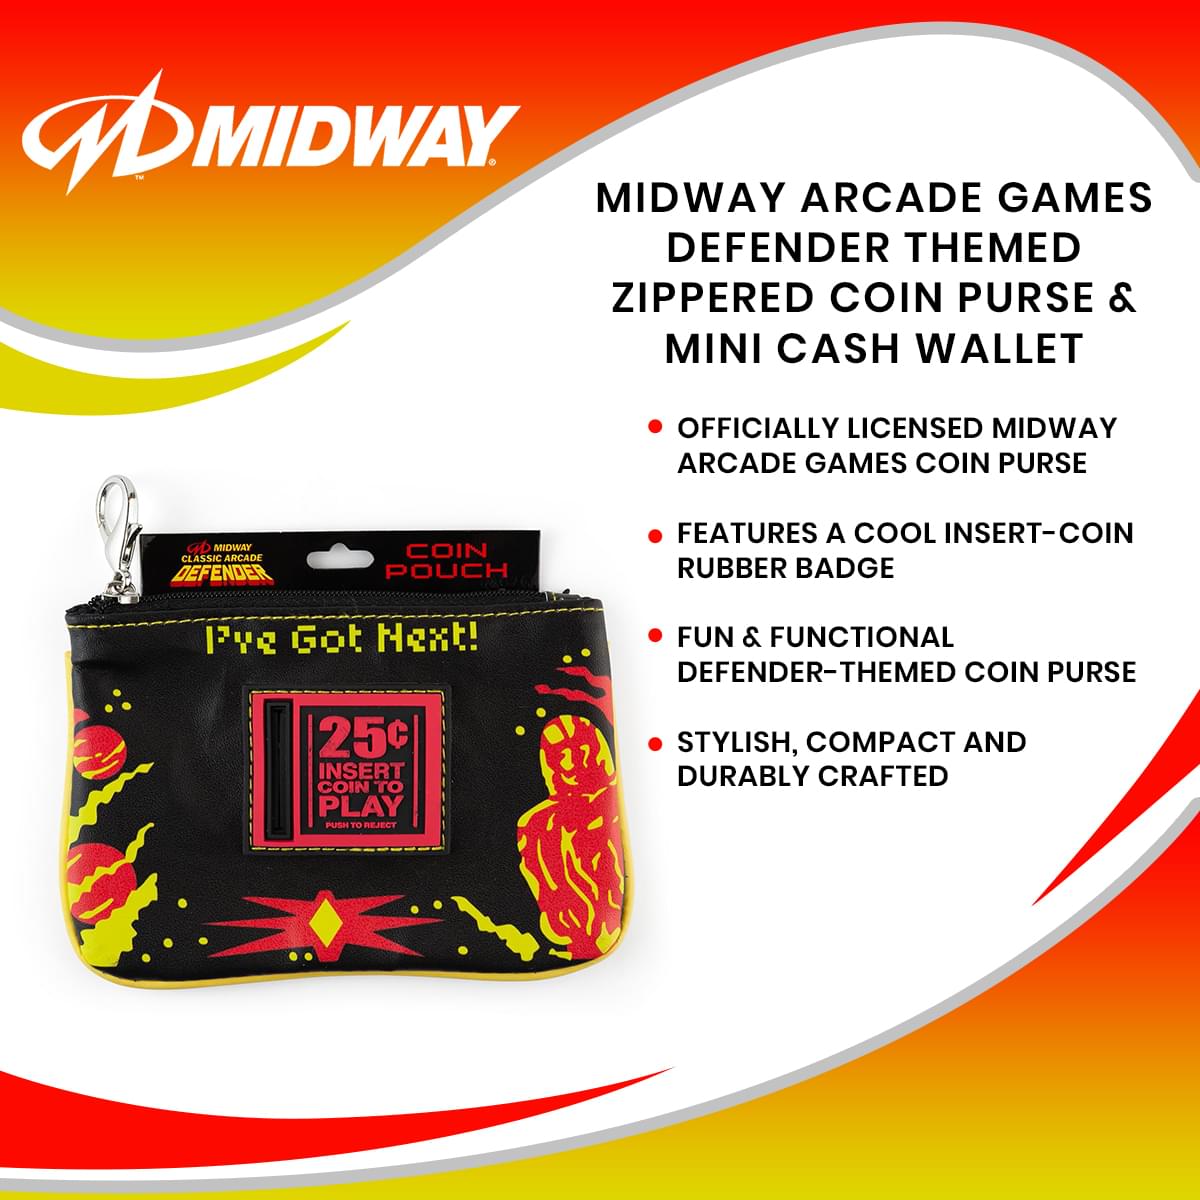 Midway Arcade Games Defender Themed Zippered Coin Purse & Mini Cash Wallet